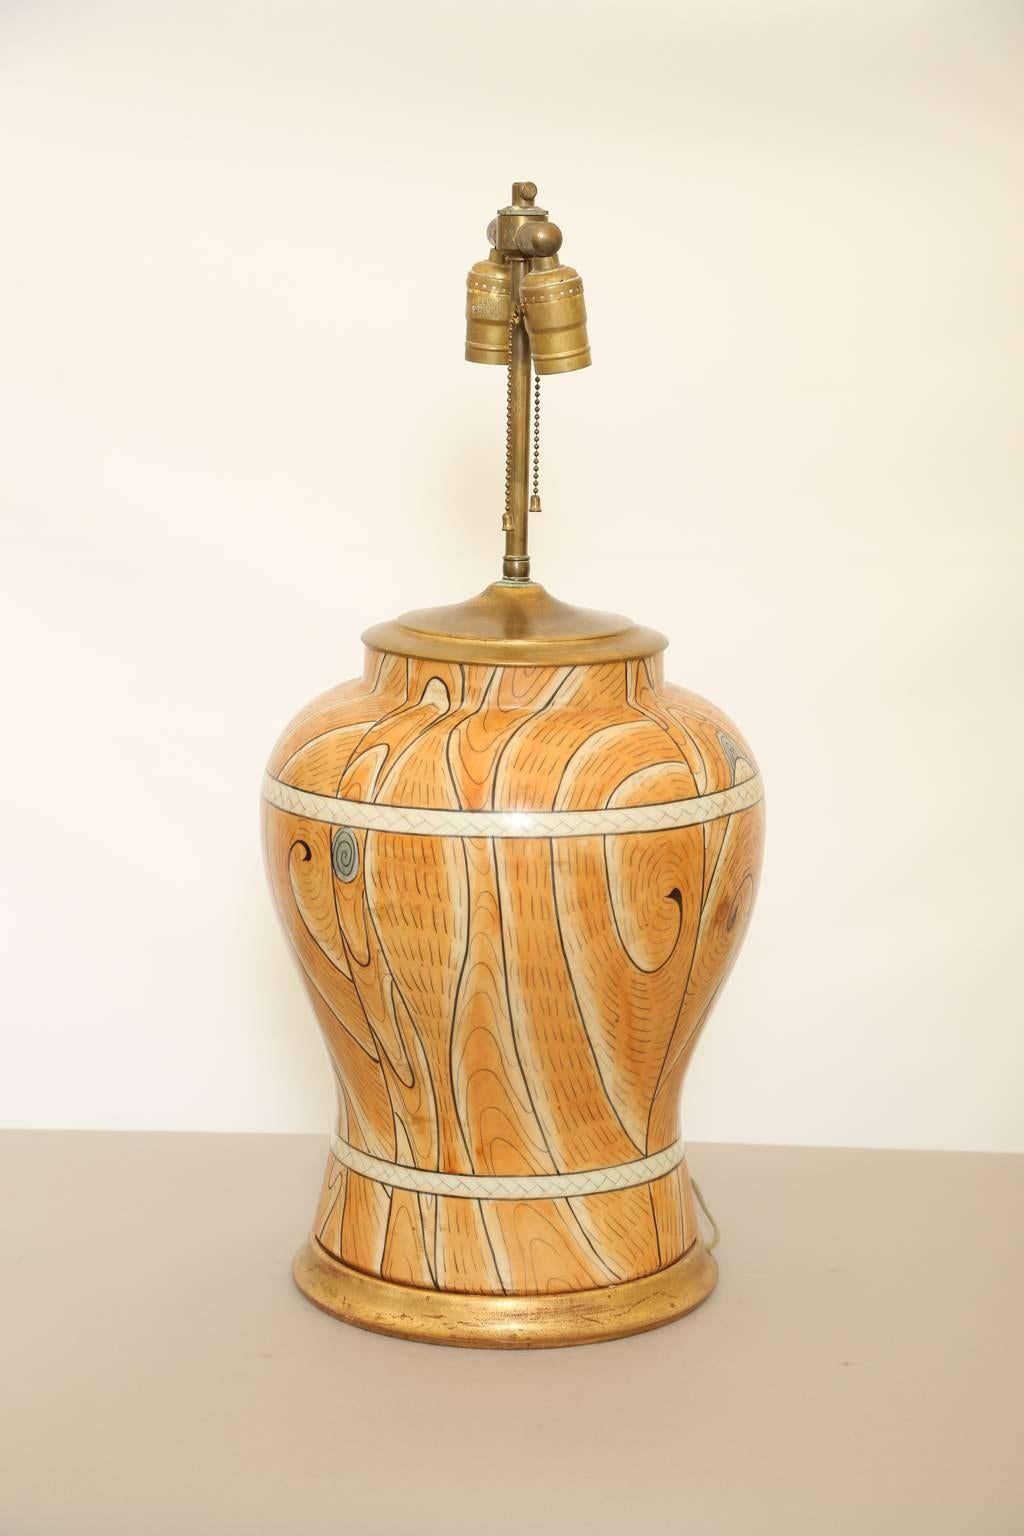 Unusual lamp, of glazed pottery, its baluster form hand-painted with trompe l'oeil wood grain planks and bands, to resemble a barrel, on round giltwood base. 

Stock ID: D1473.